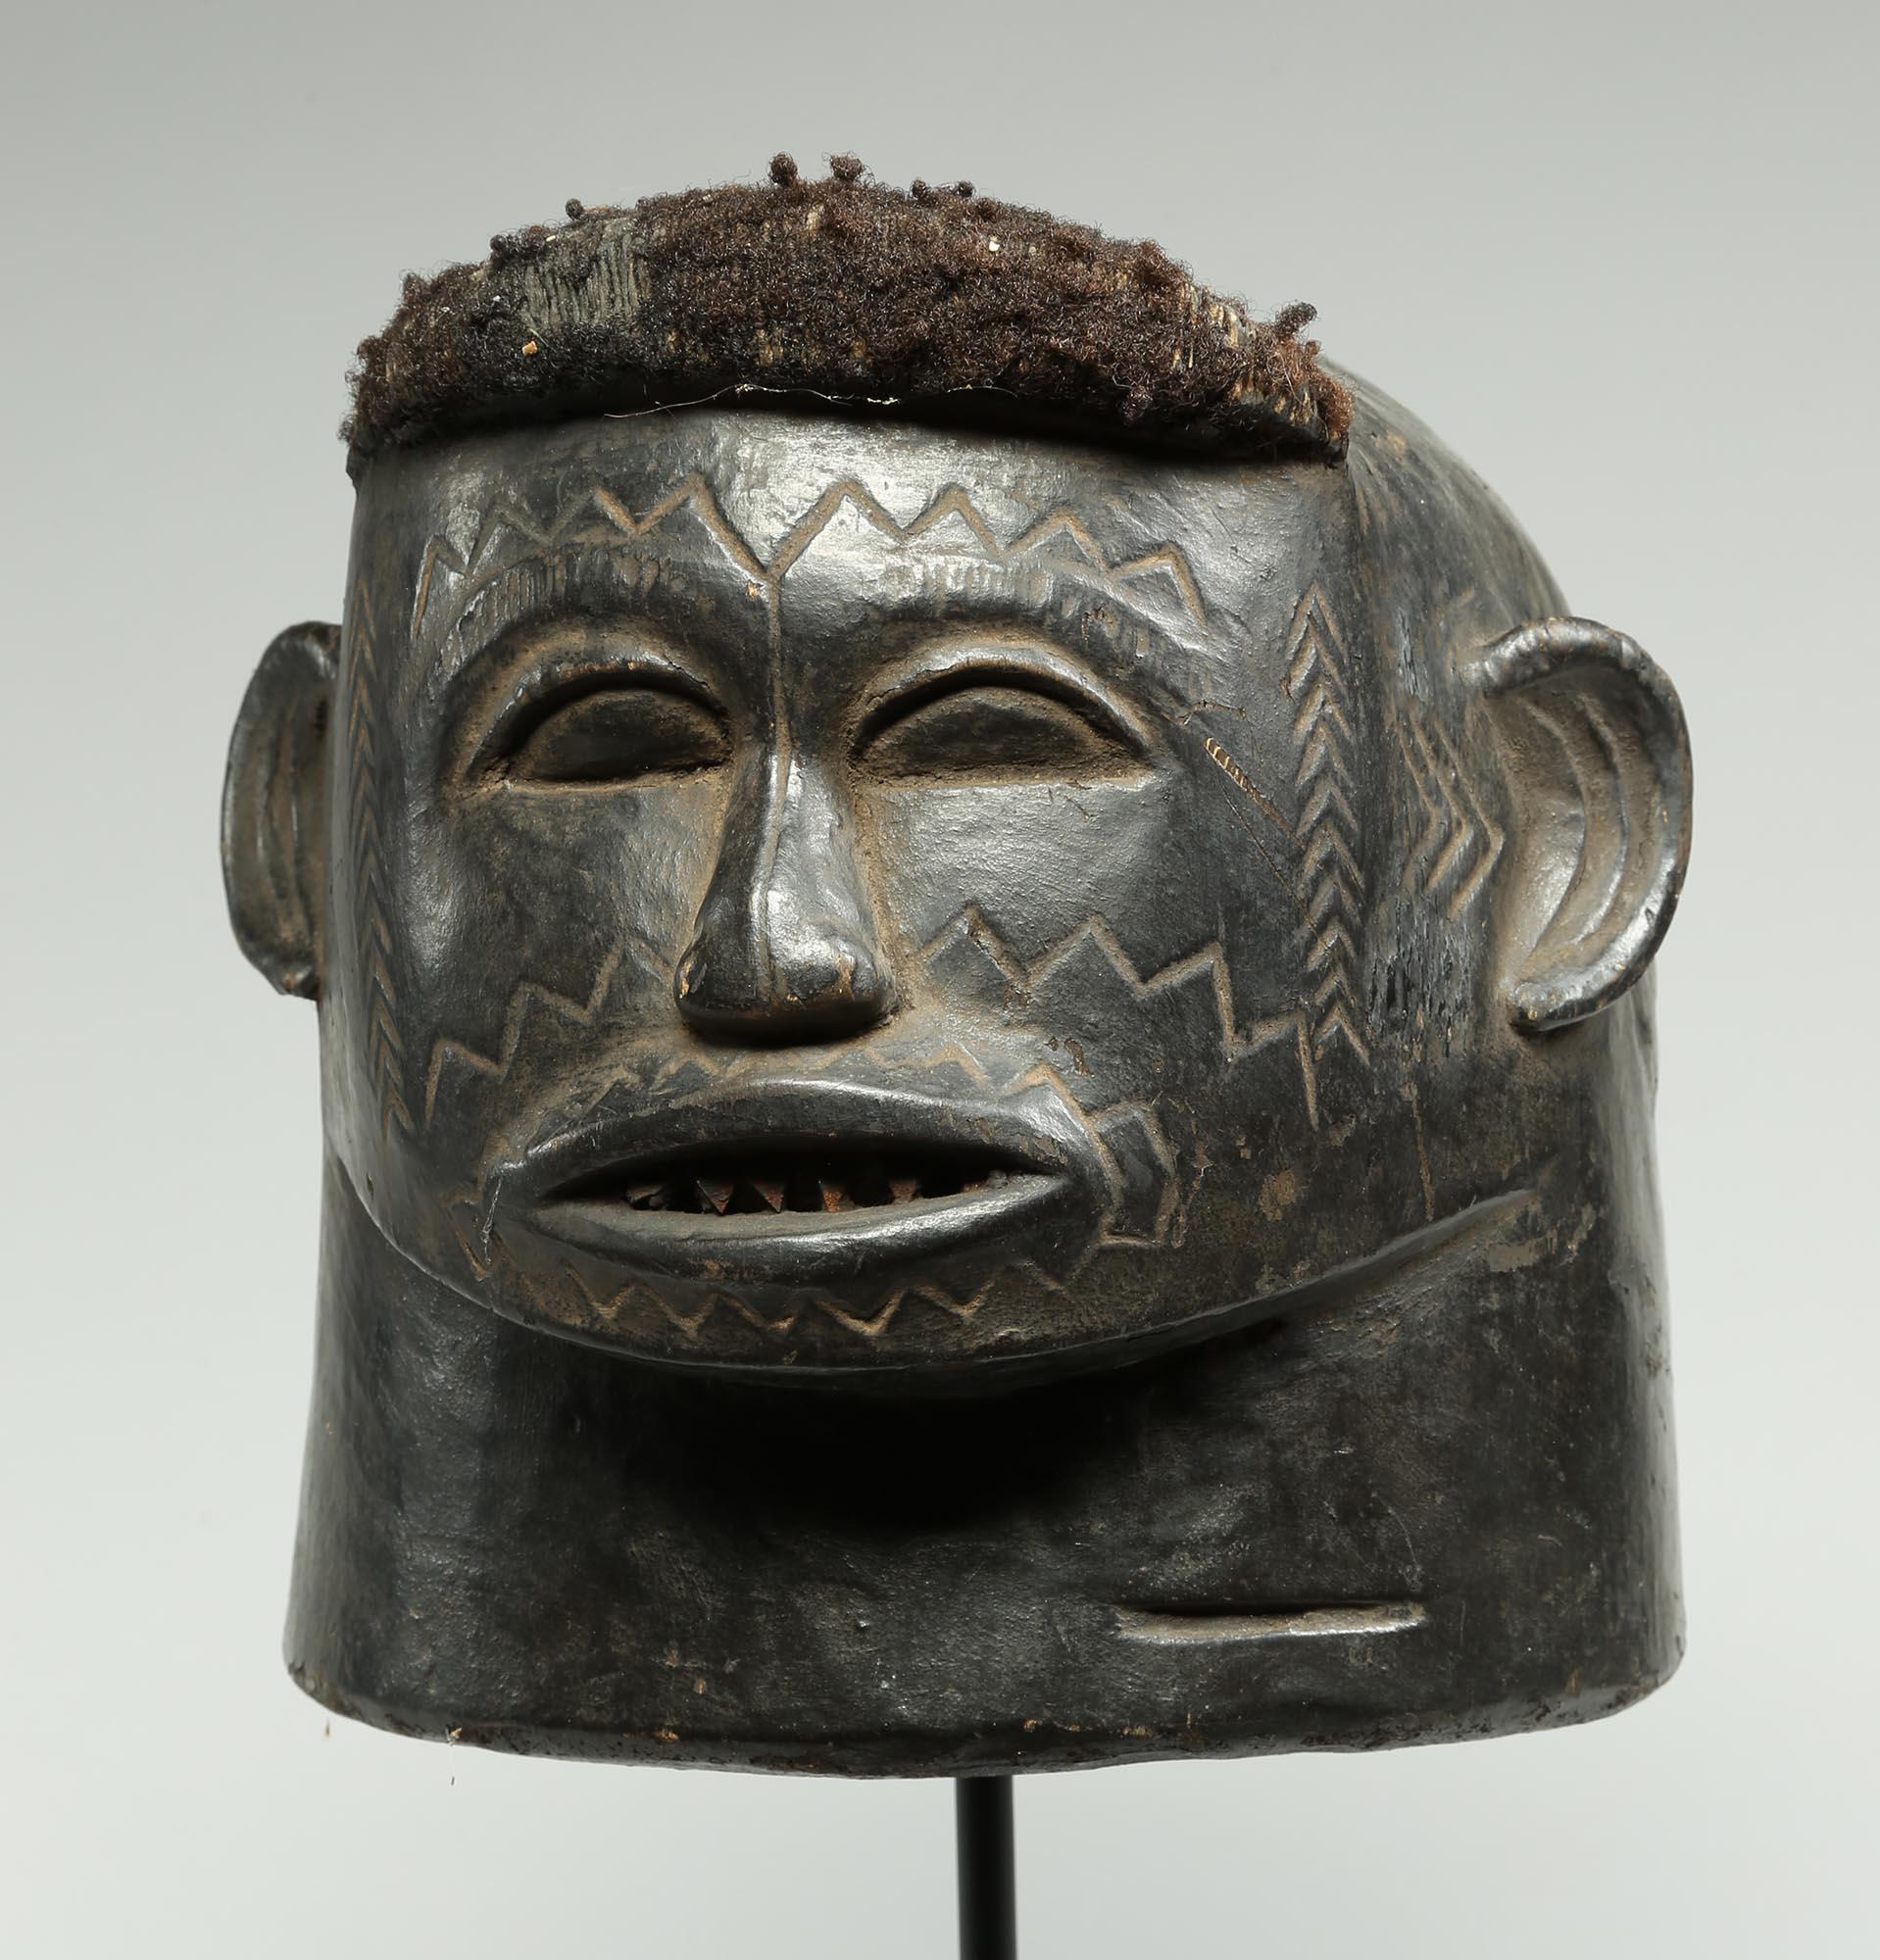 Powerful Scarified Makonde portrait helmet mask from Tanzania. Early 20th century with heavy dark patina from traditional tribal use, wear inside from being used. Finely carved features, incised scarification zig zag lines on cheeks, forehead and